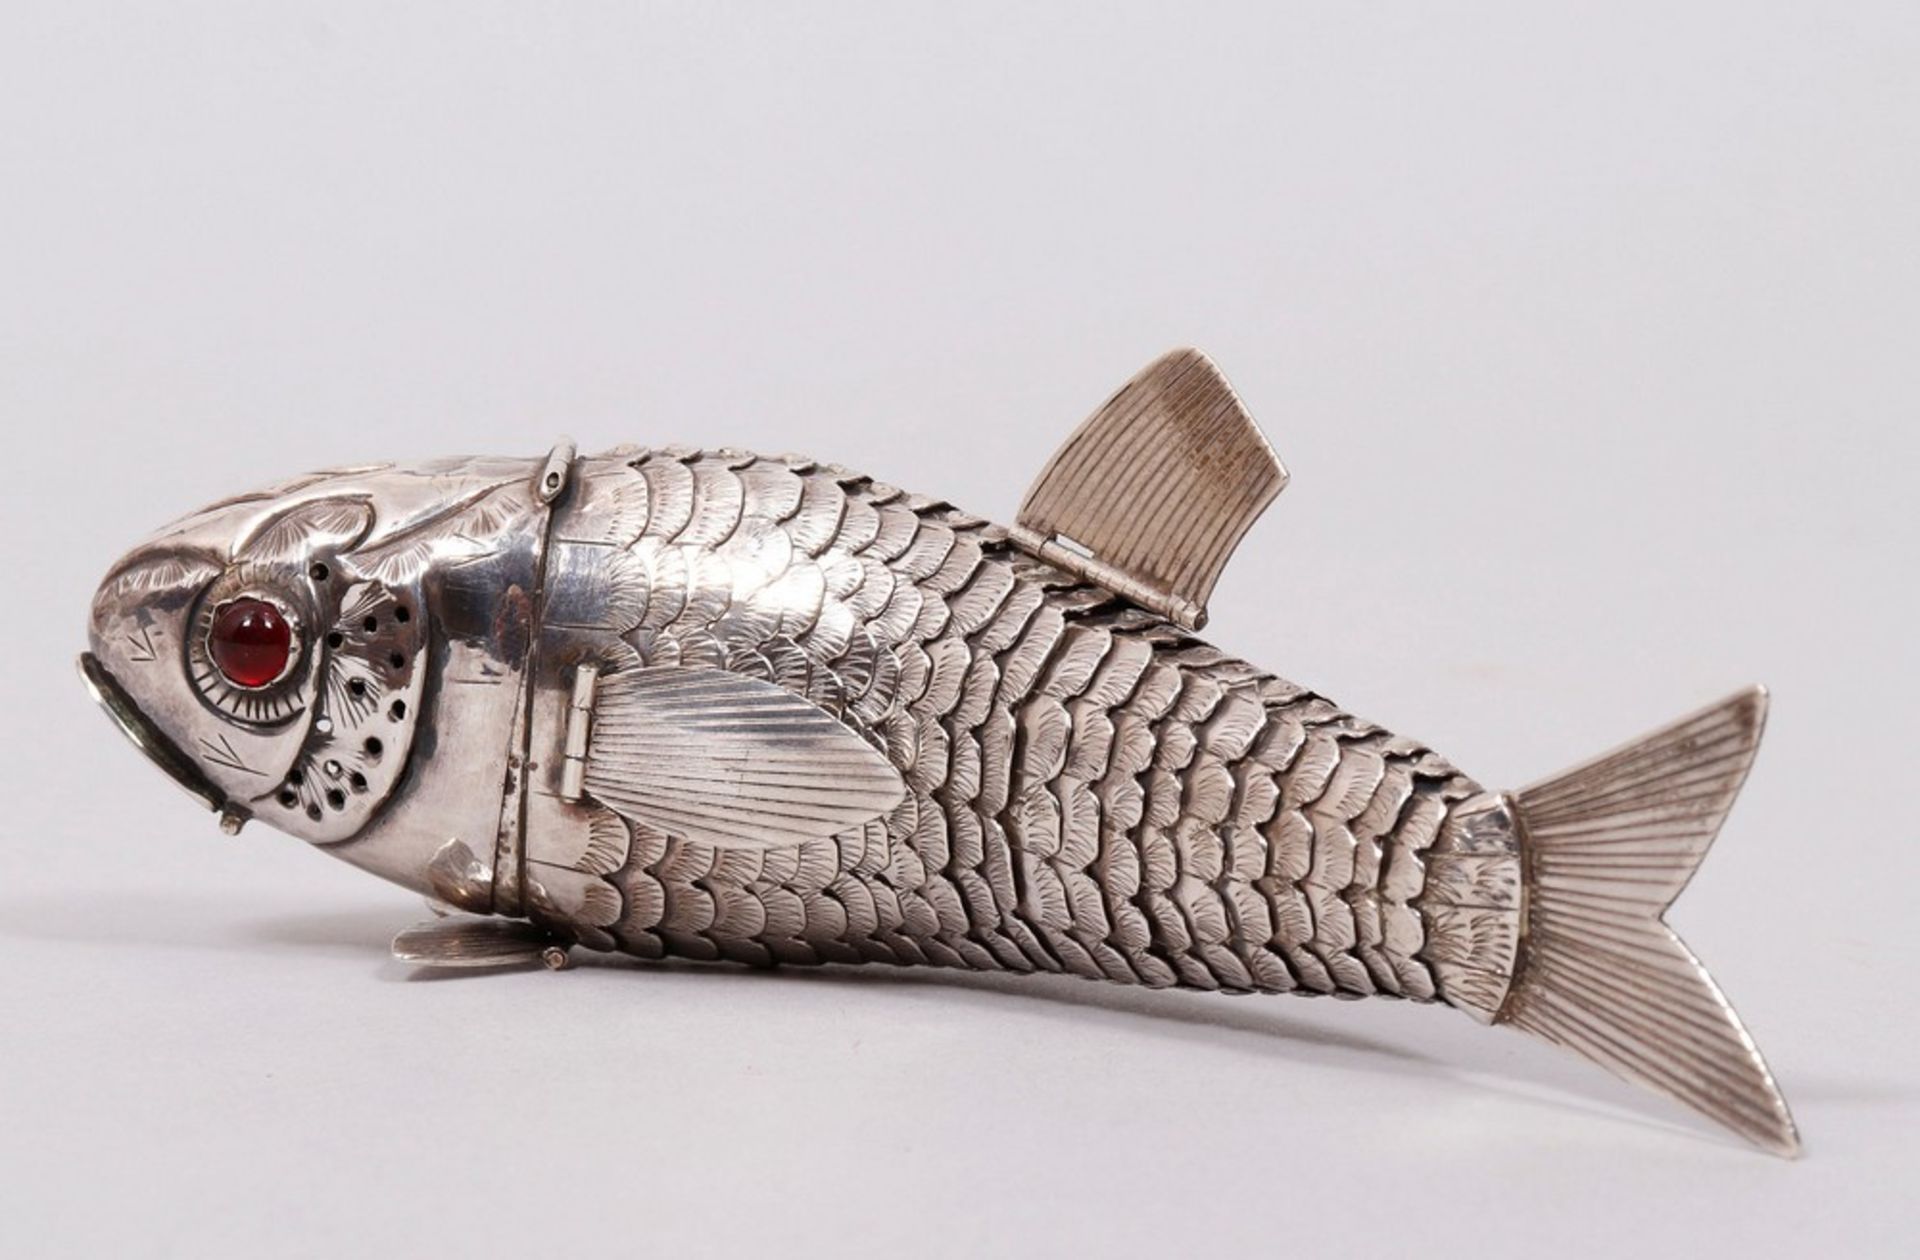 Besamim box in shape of a fish, 830 silver, probably Scandinavia, 19th C.